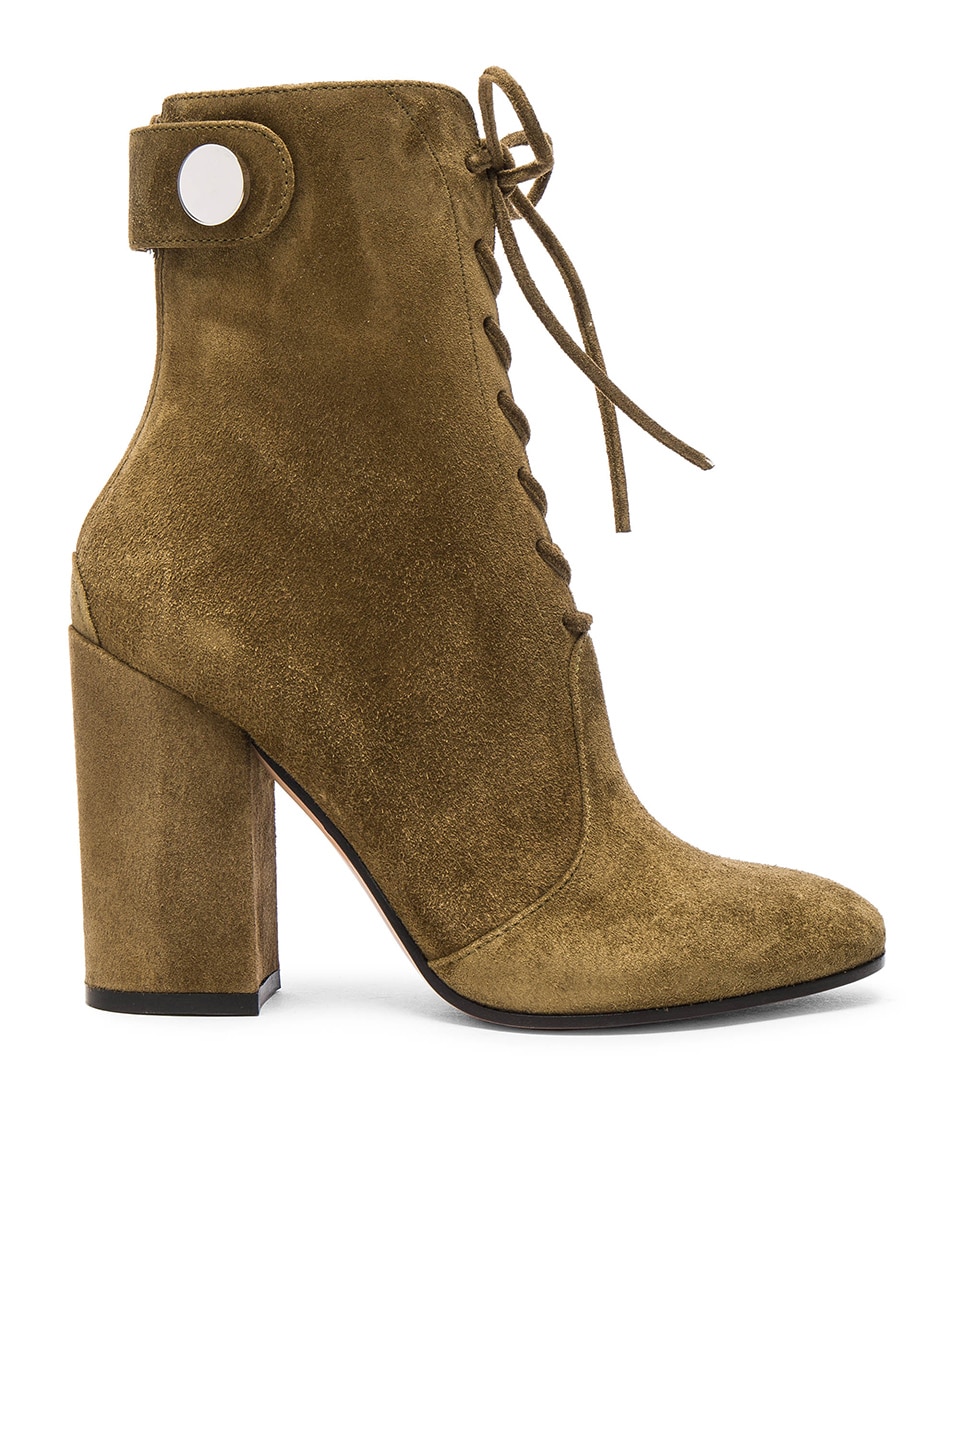 Image 1 of Gianvito Rossi Suede Lace Up Boots in Marais